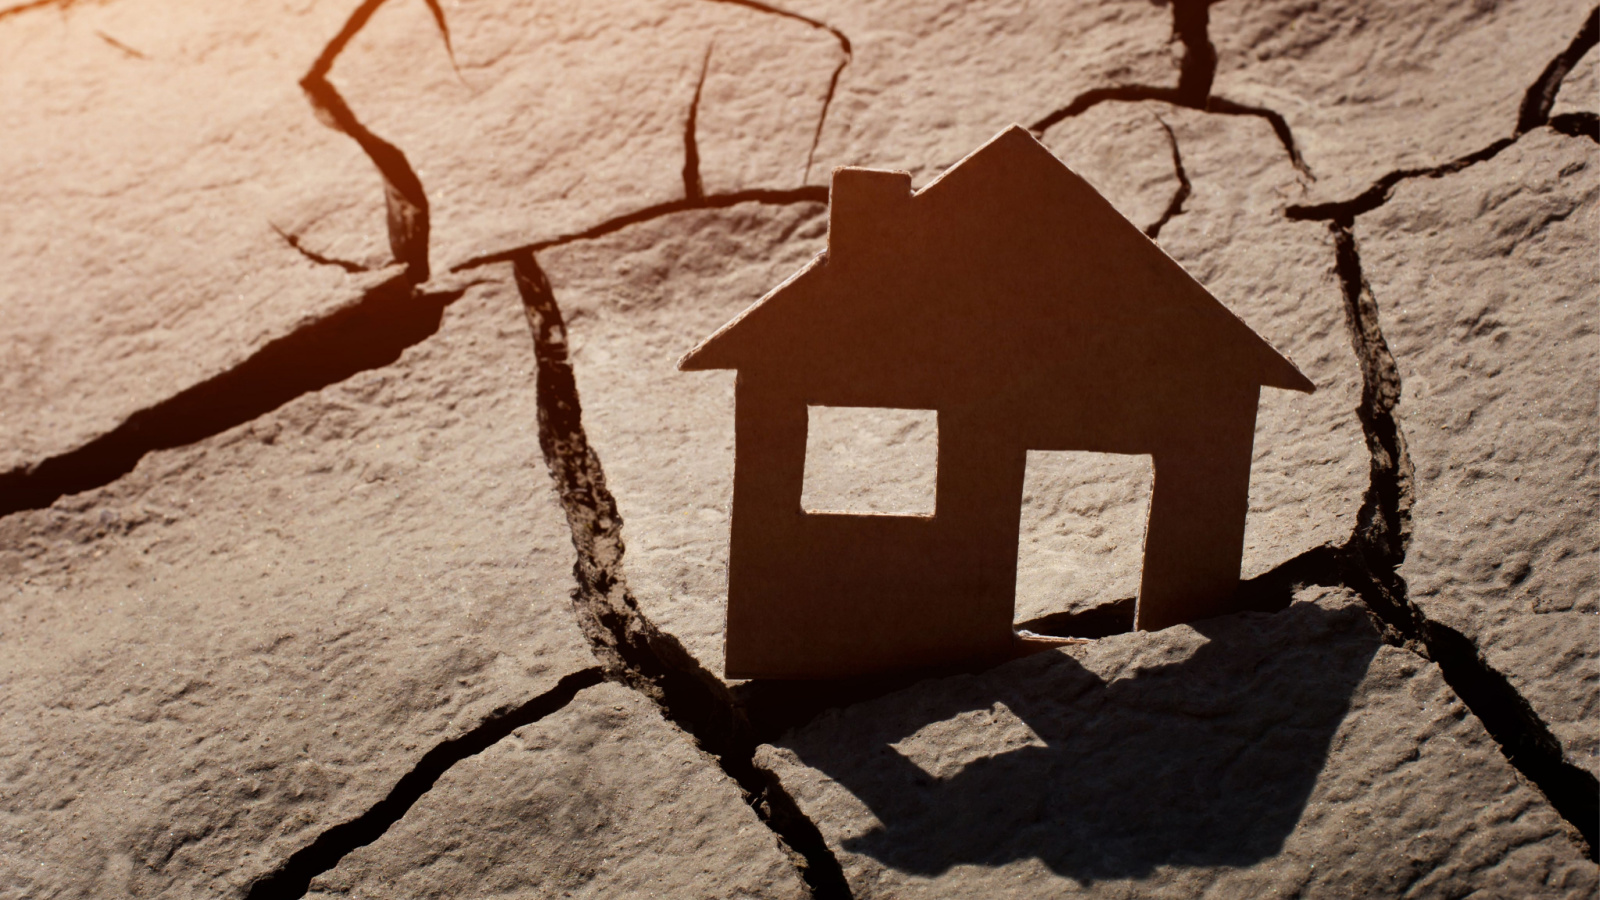 Housing Bubble. Flat cut-out image of house jammed into the crack of dry desert, symbolizing housing crisis